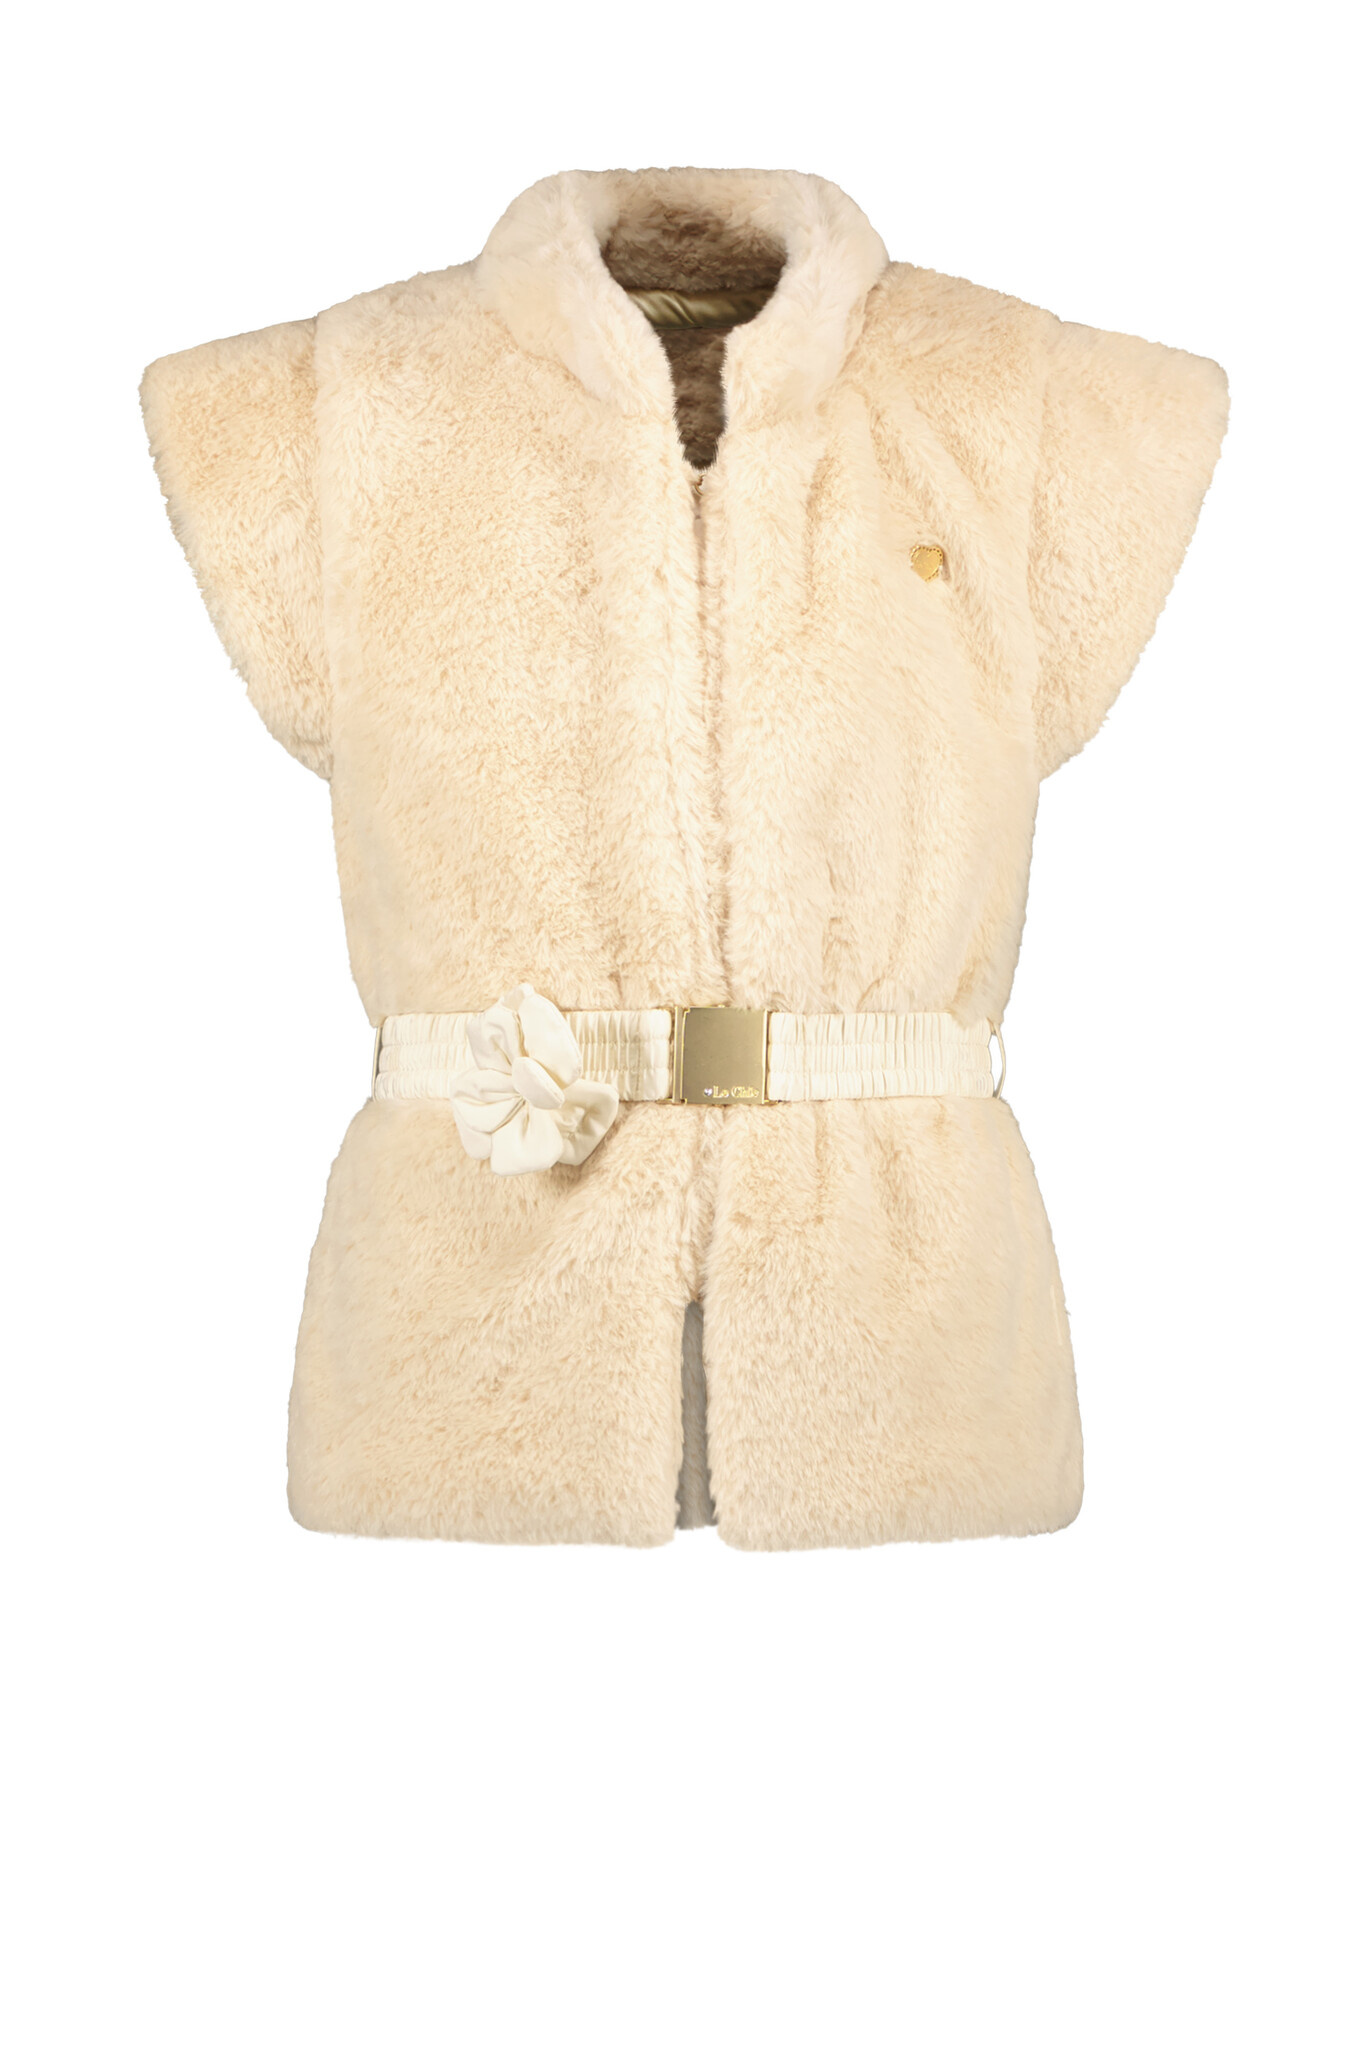 Le Chic C308-5105 Meisjes Gilet - Pearled Ivory - Maat 128